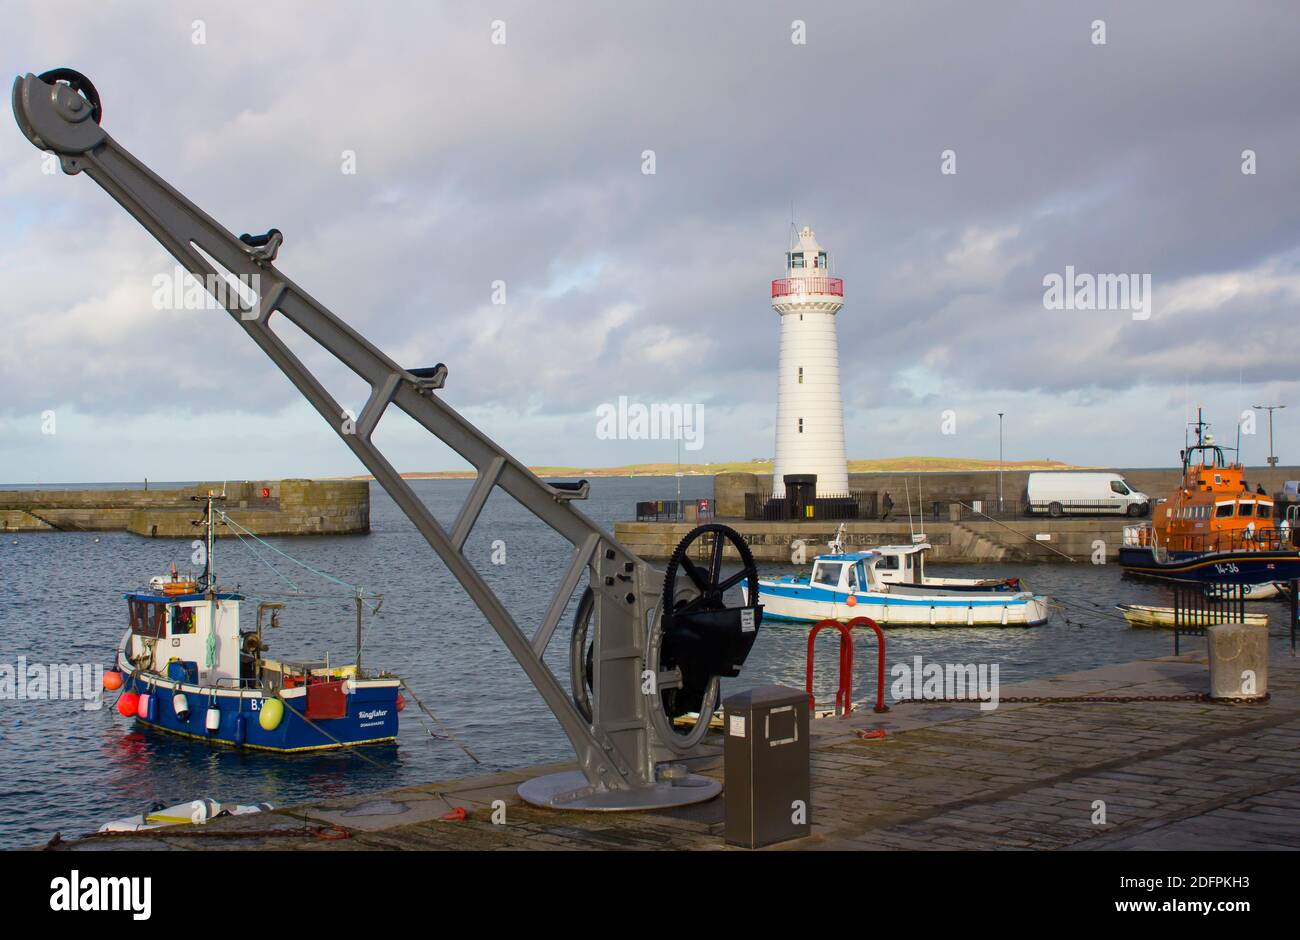 2 December 2020 Donaghadee Harbour and Lighthouse on the Ards Peninsula in Northern Ireland bathed in winter sunshine on a bight yet cold winter after Stock Photo